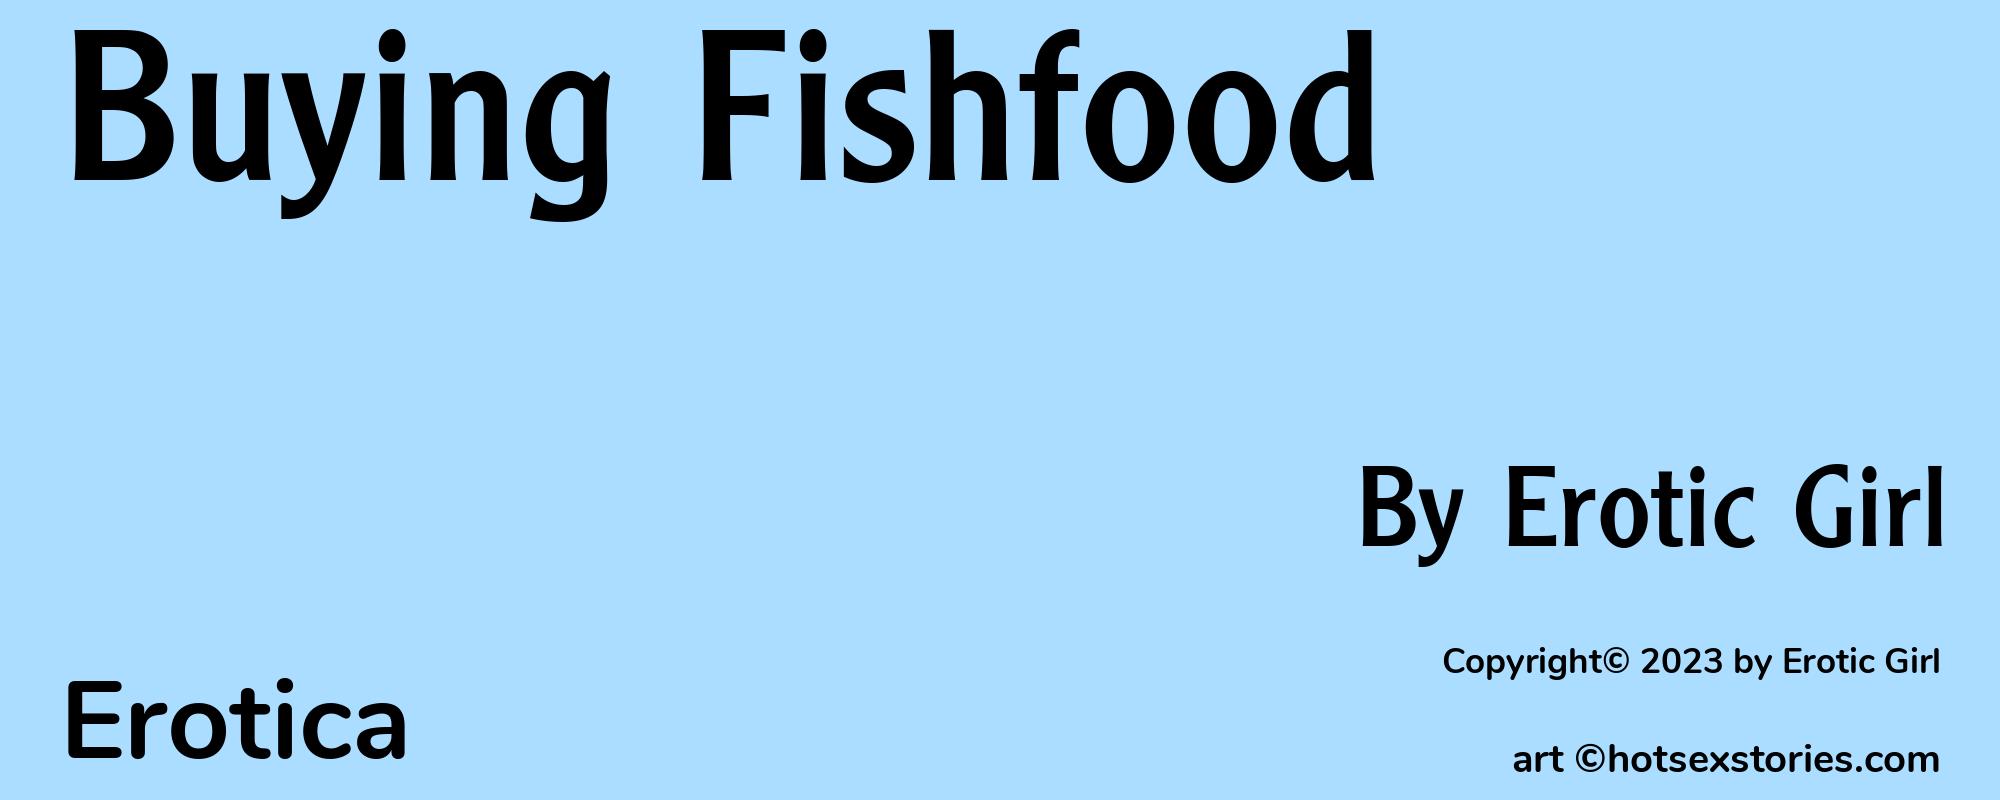 Buying Fishfood - Cover